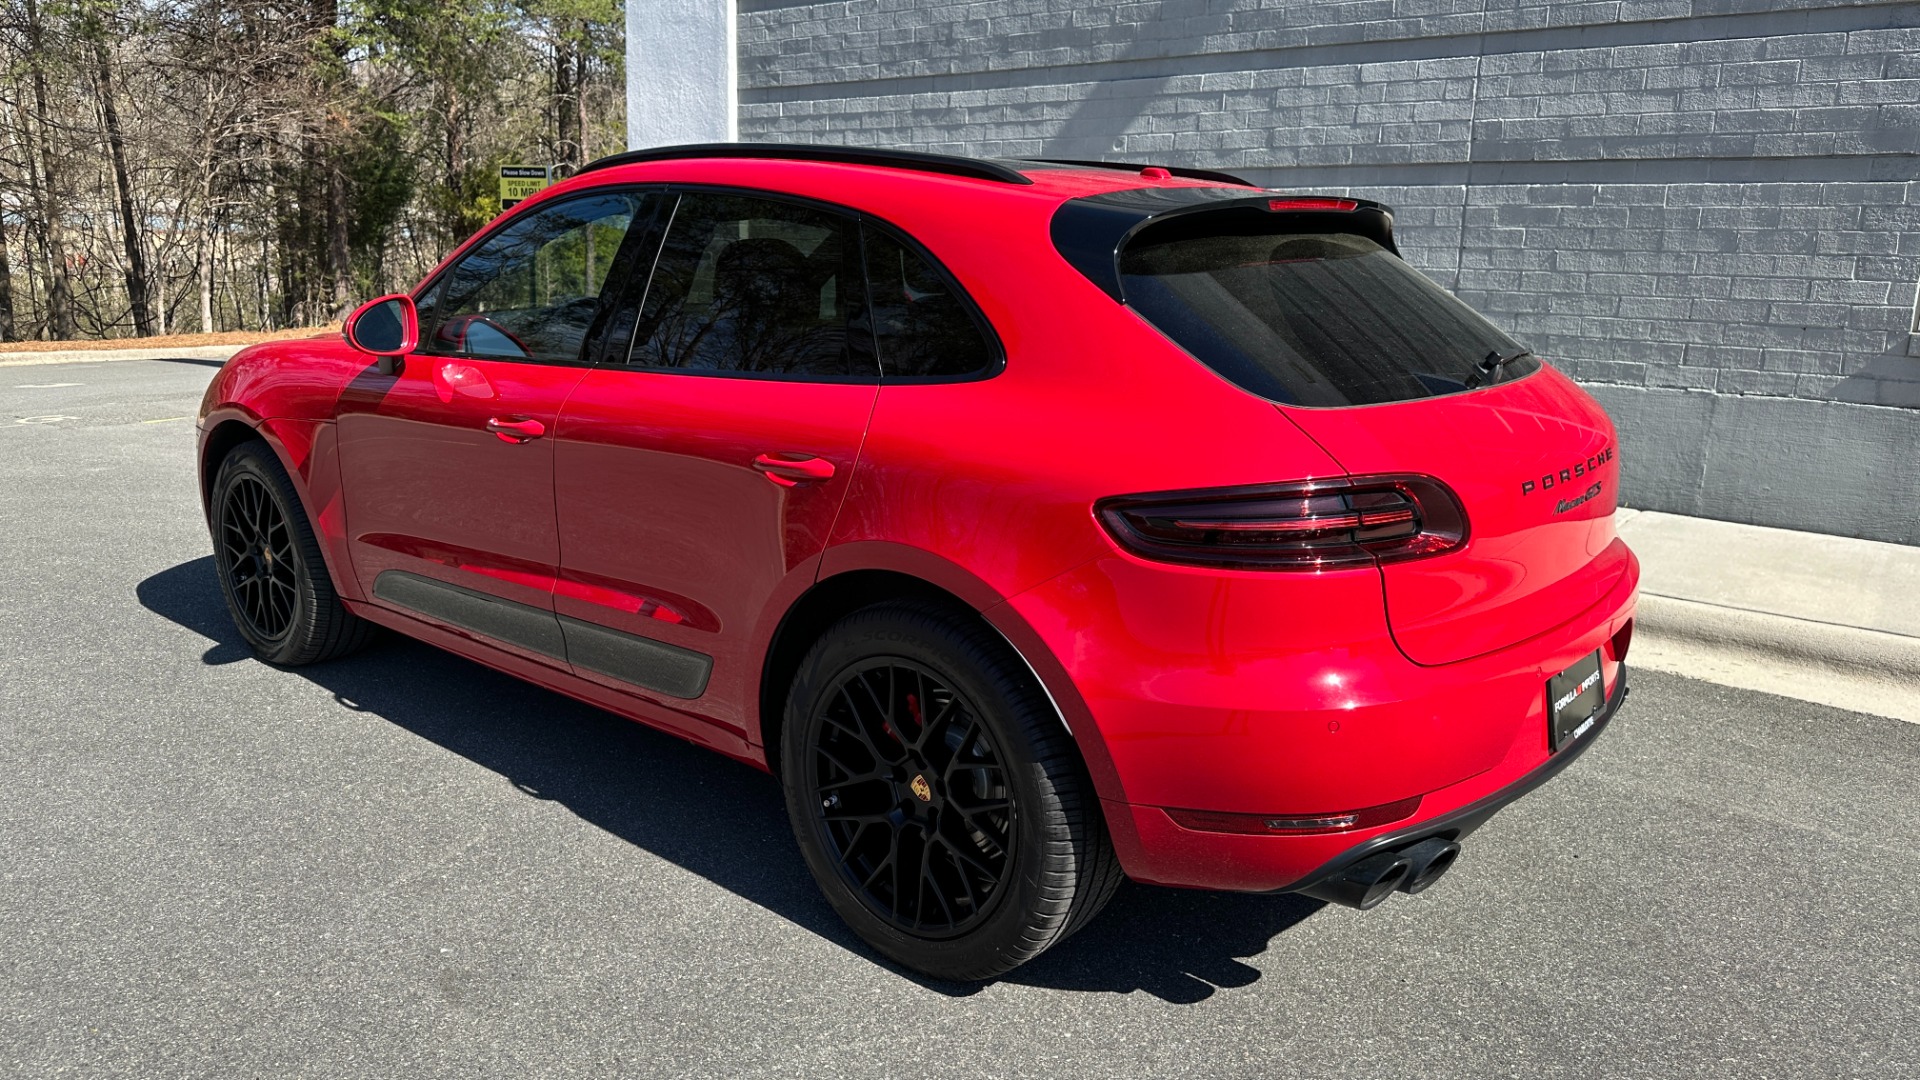 Used 2017 Porsche Macan GTS / CARBON FIBER / GTS INTERIOR / DYNAMIC LIGHTS / BOSE / SPORT WHEEL for sale Sold at Formula Imports in Charlotte NC 28227 7